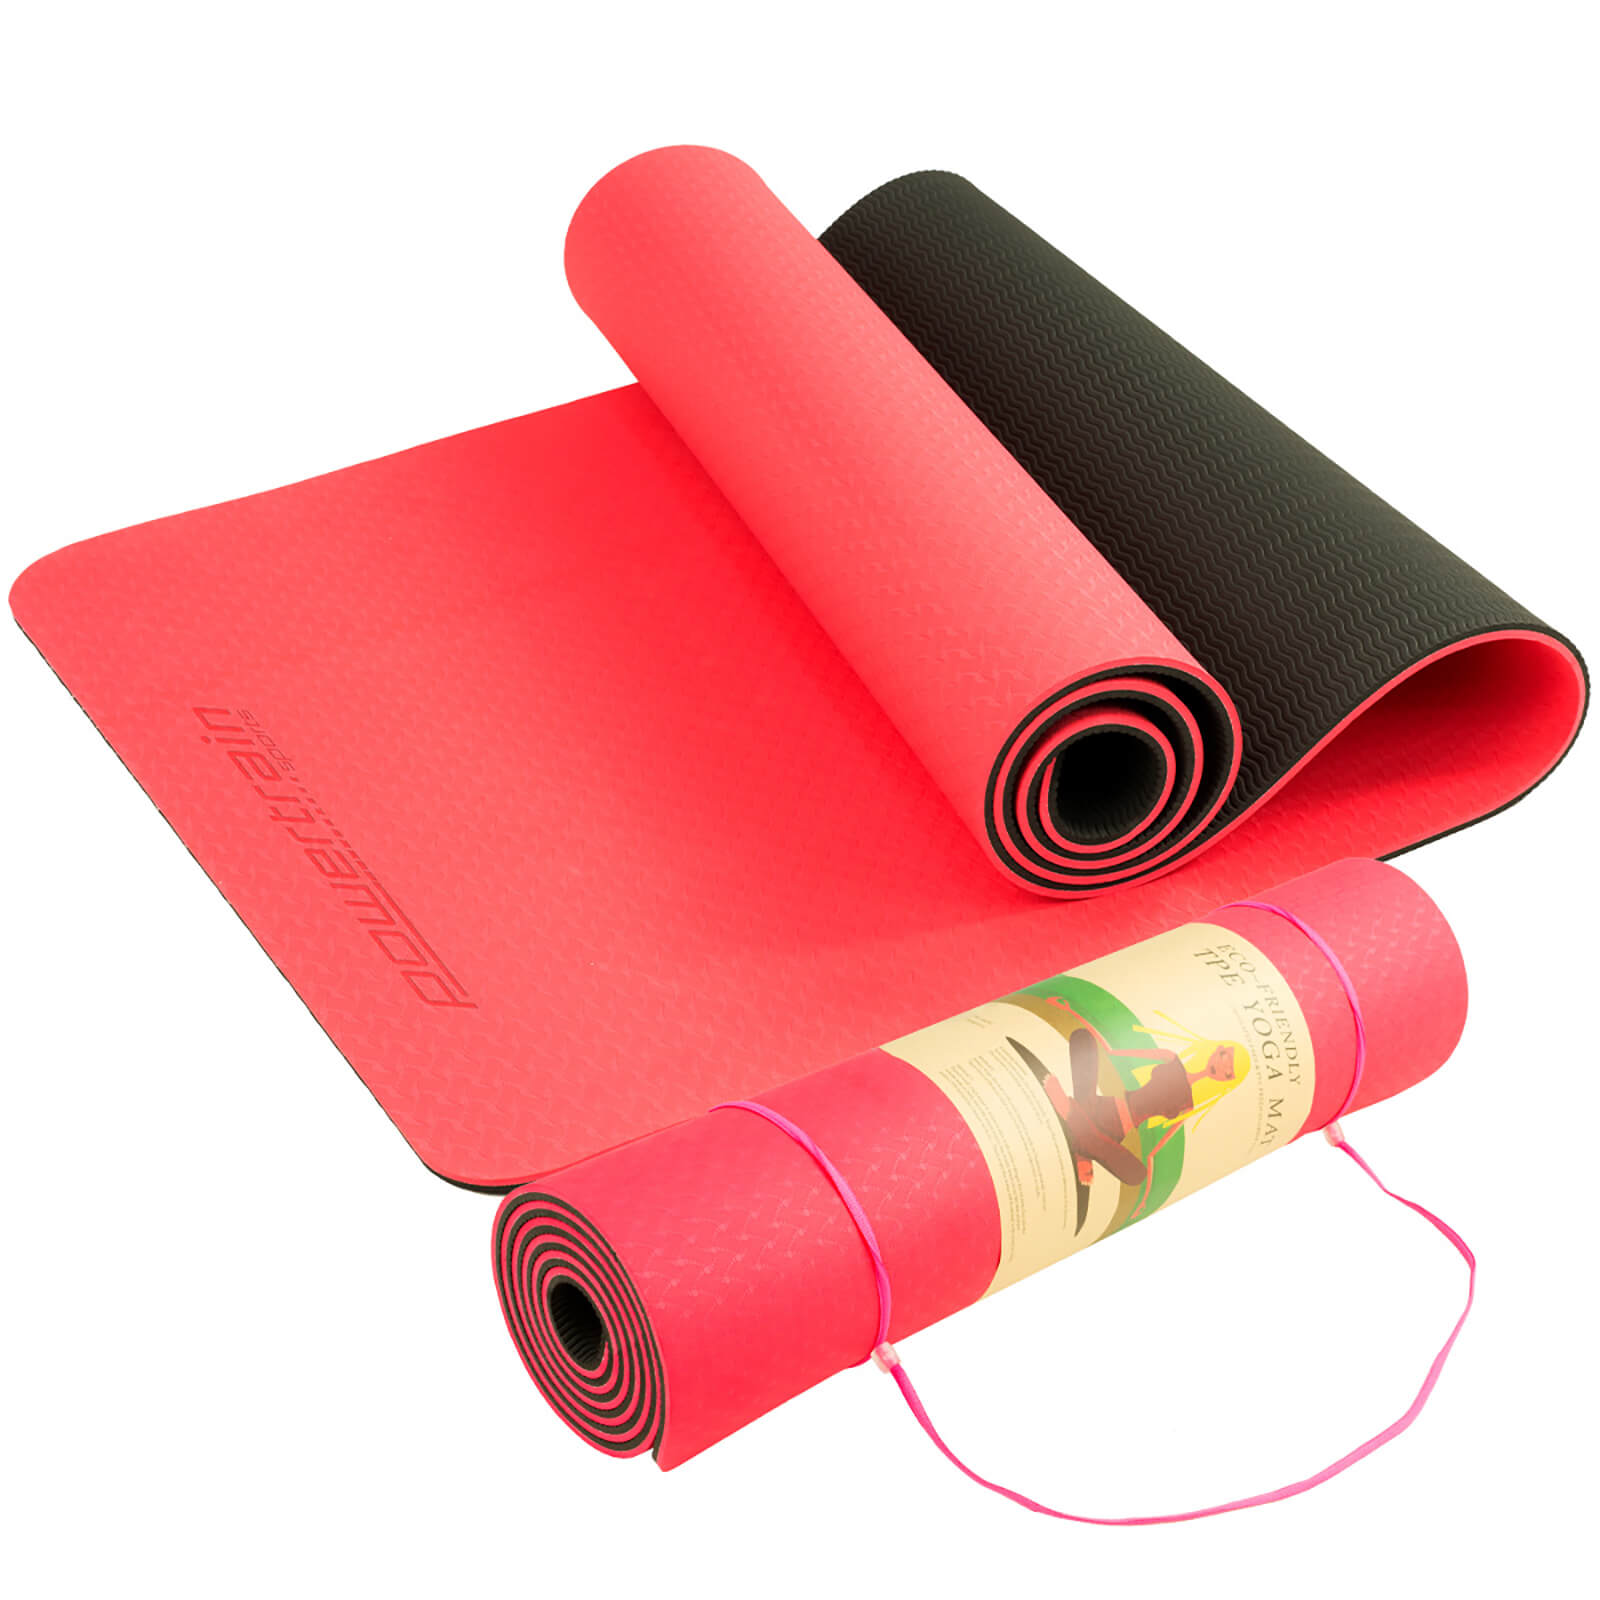 Eco-Friendly Dual Layer 8mm Yoga Mat | Red Blush | Non-Slip Surface and Carry Strap for Ultimate Comfort and Portability